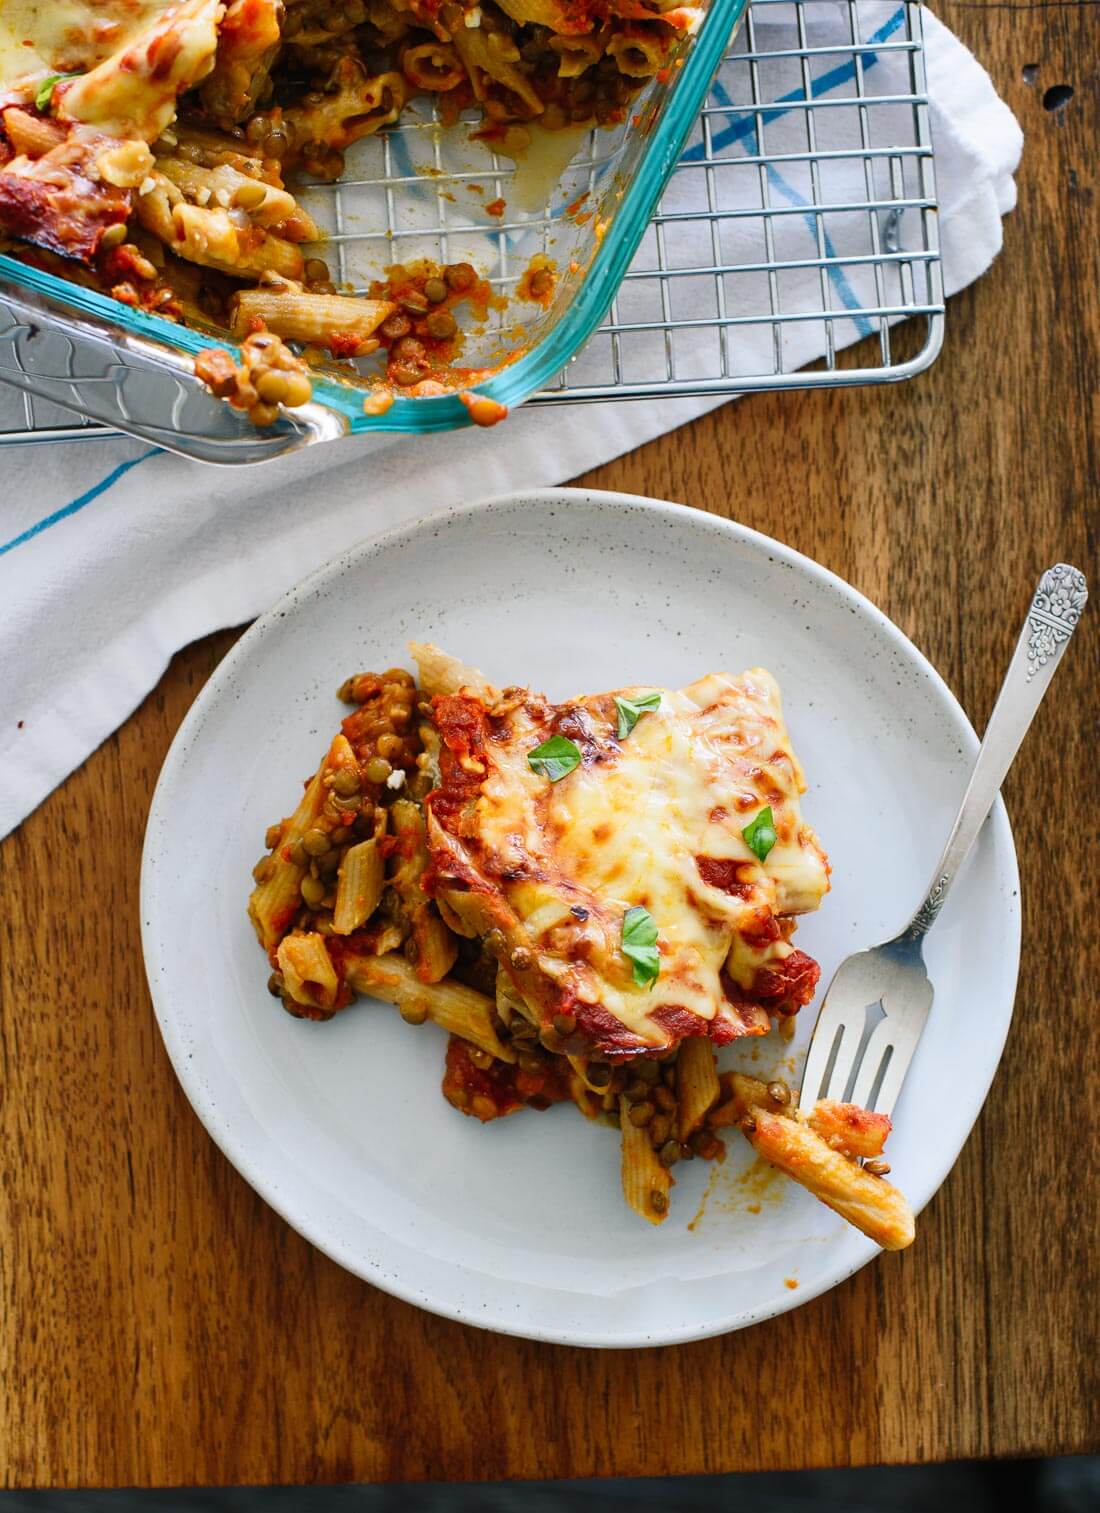 This lentil baked ziti recipe is vegetarian comfort food at its best. cookieandkate.com